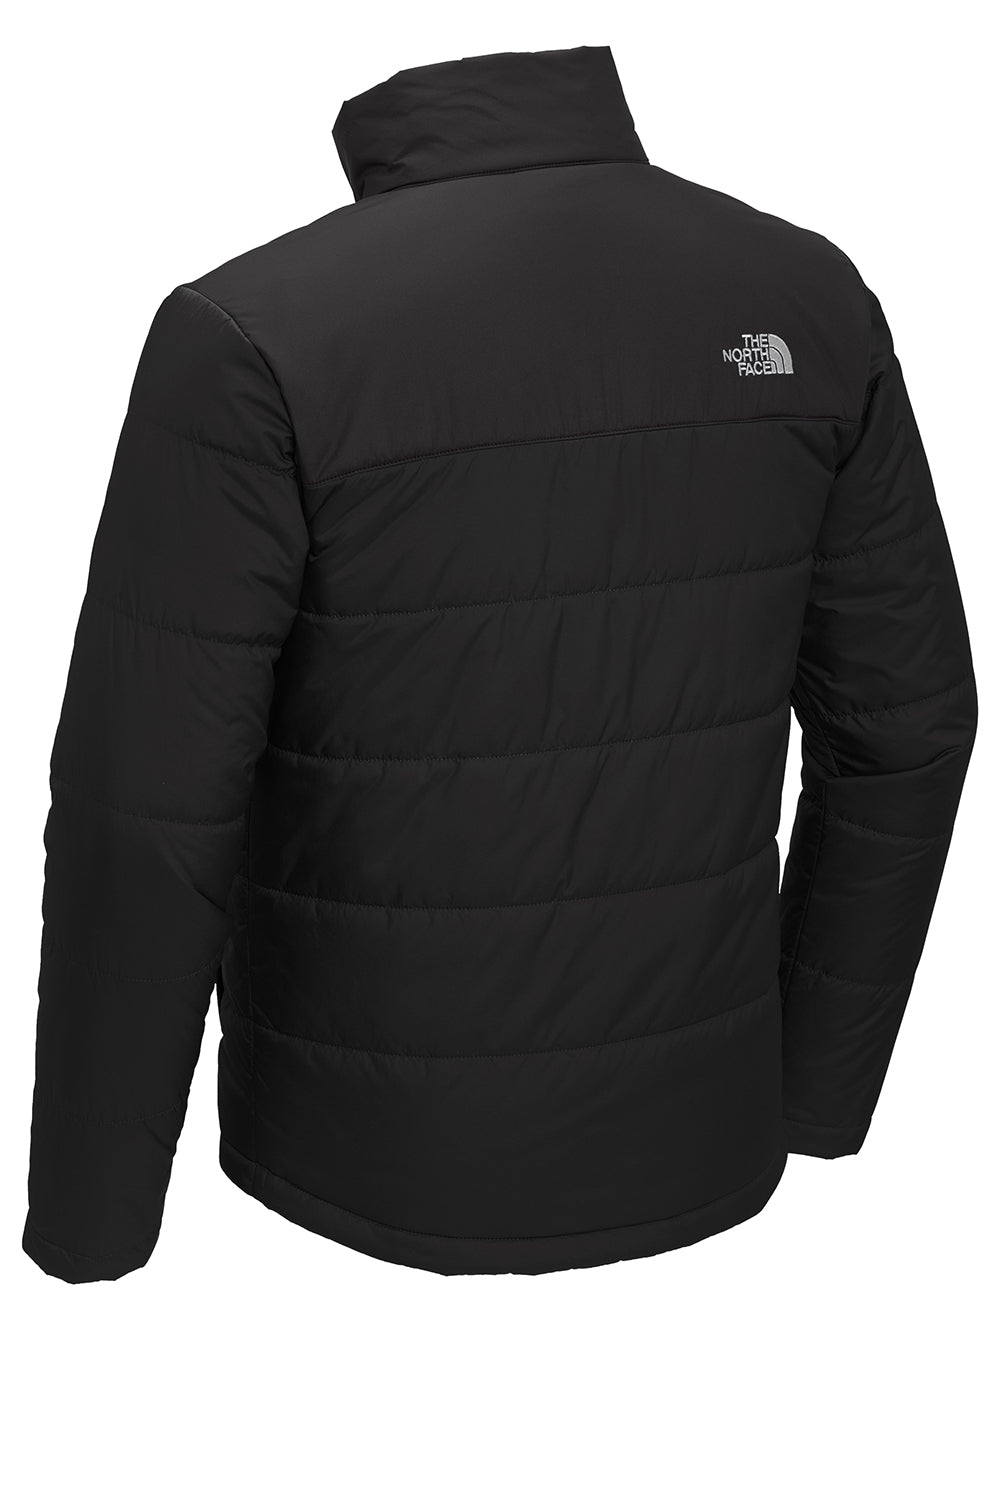 The North Face NF0A7V6J Mens Everyday Insulated Full Zip Jacket Black Flat Back